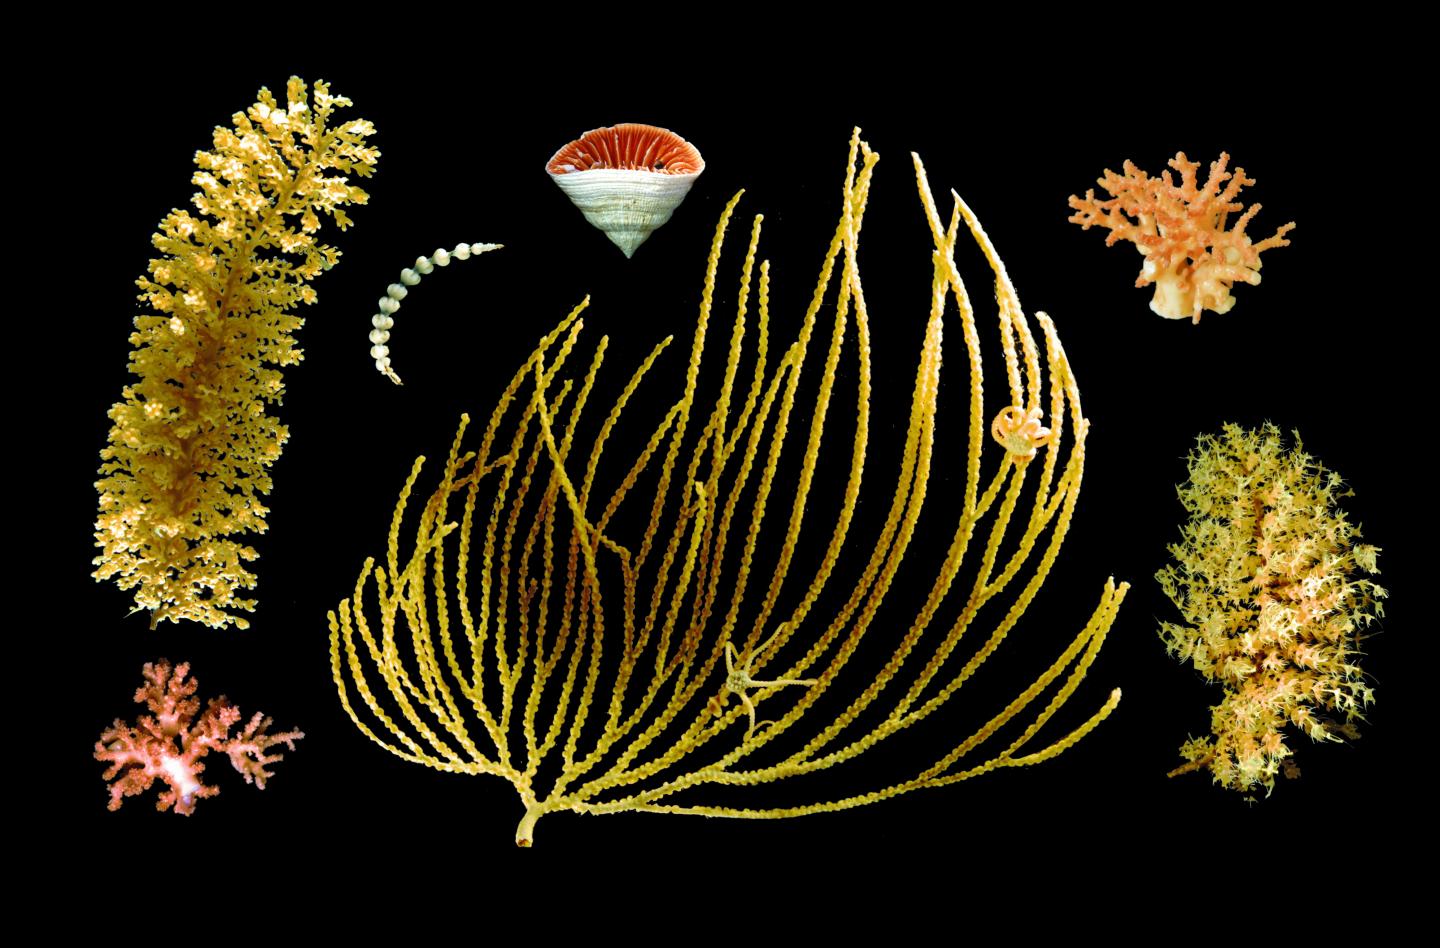 Corals Found in the Southern Ocean